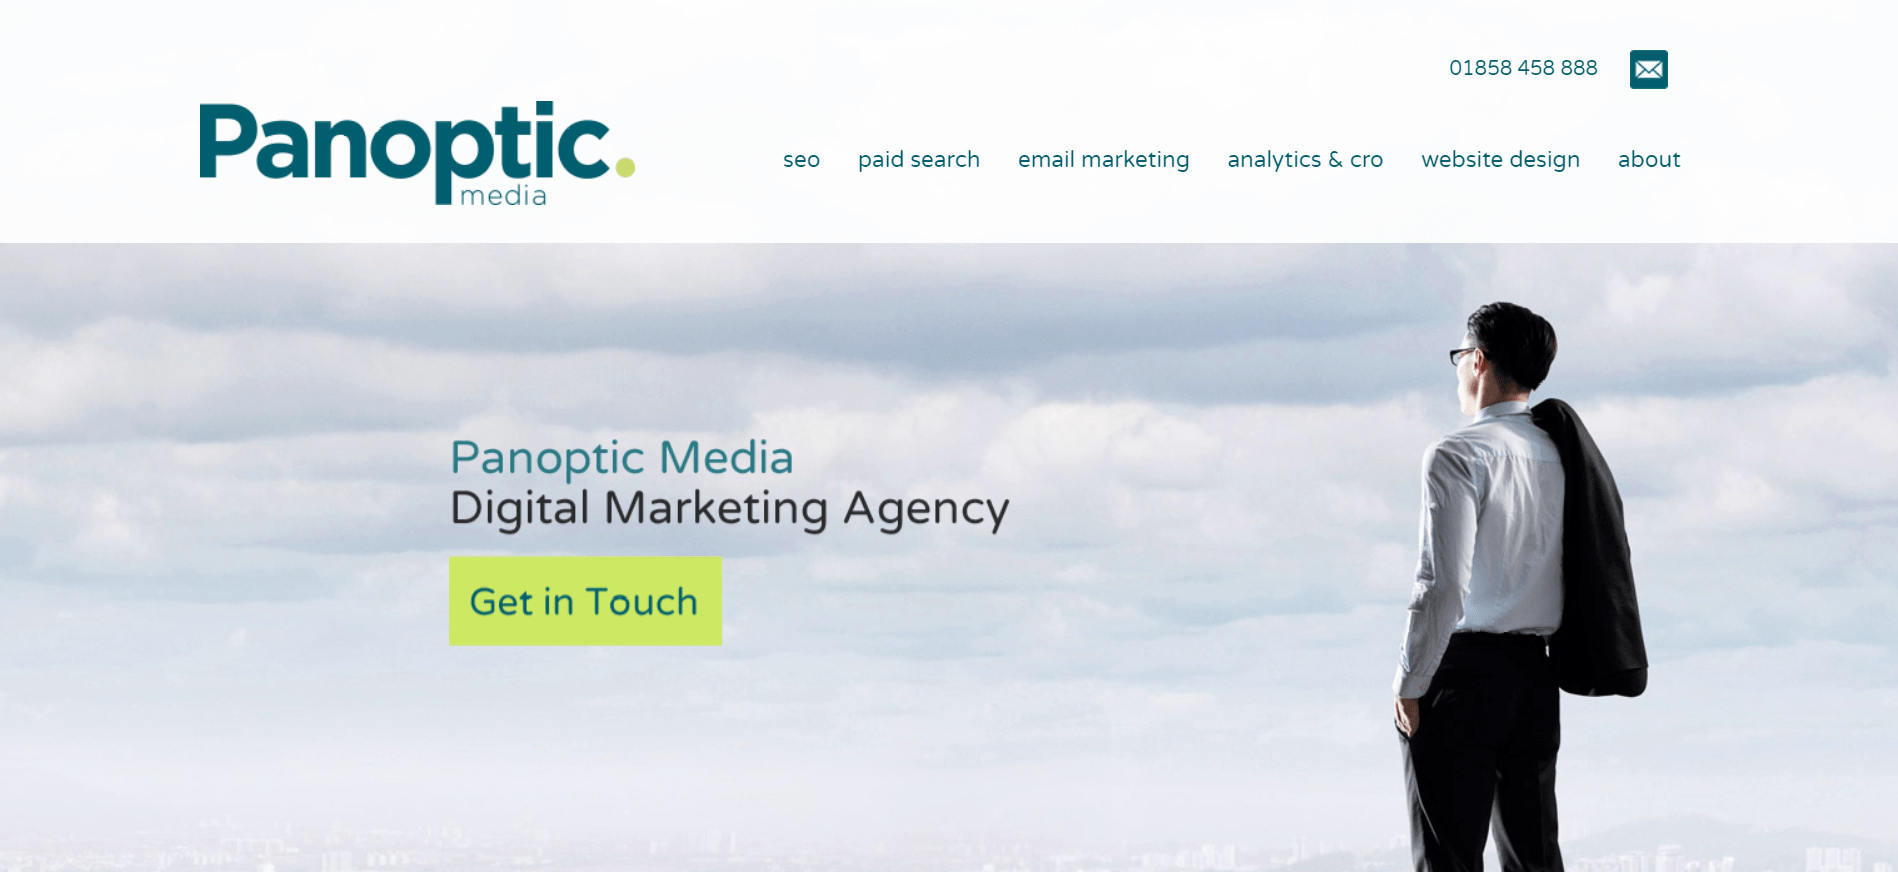 Panoptic Media Overview- PPC Management company